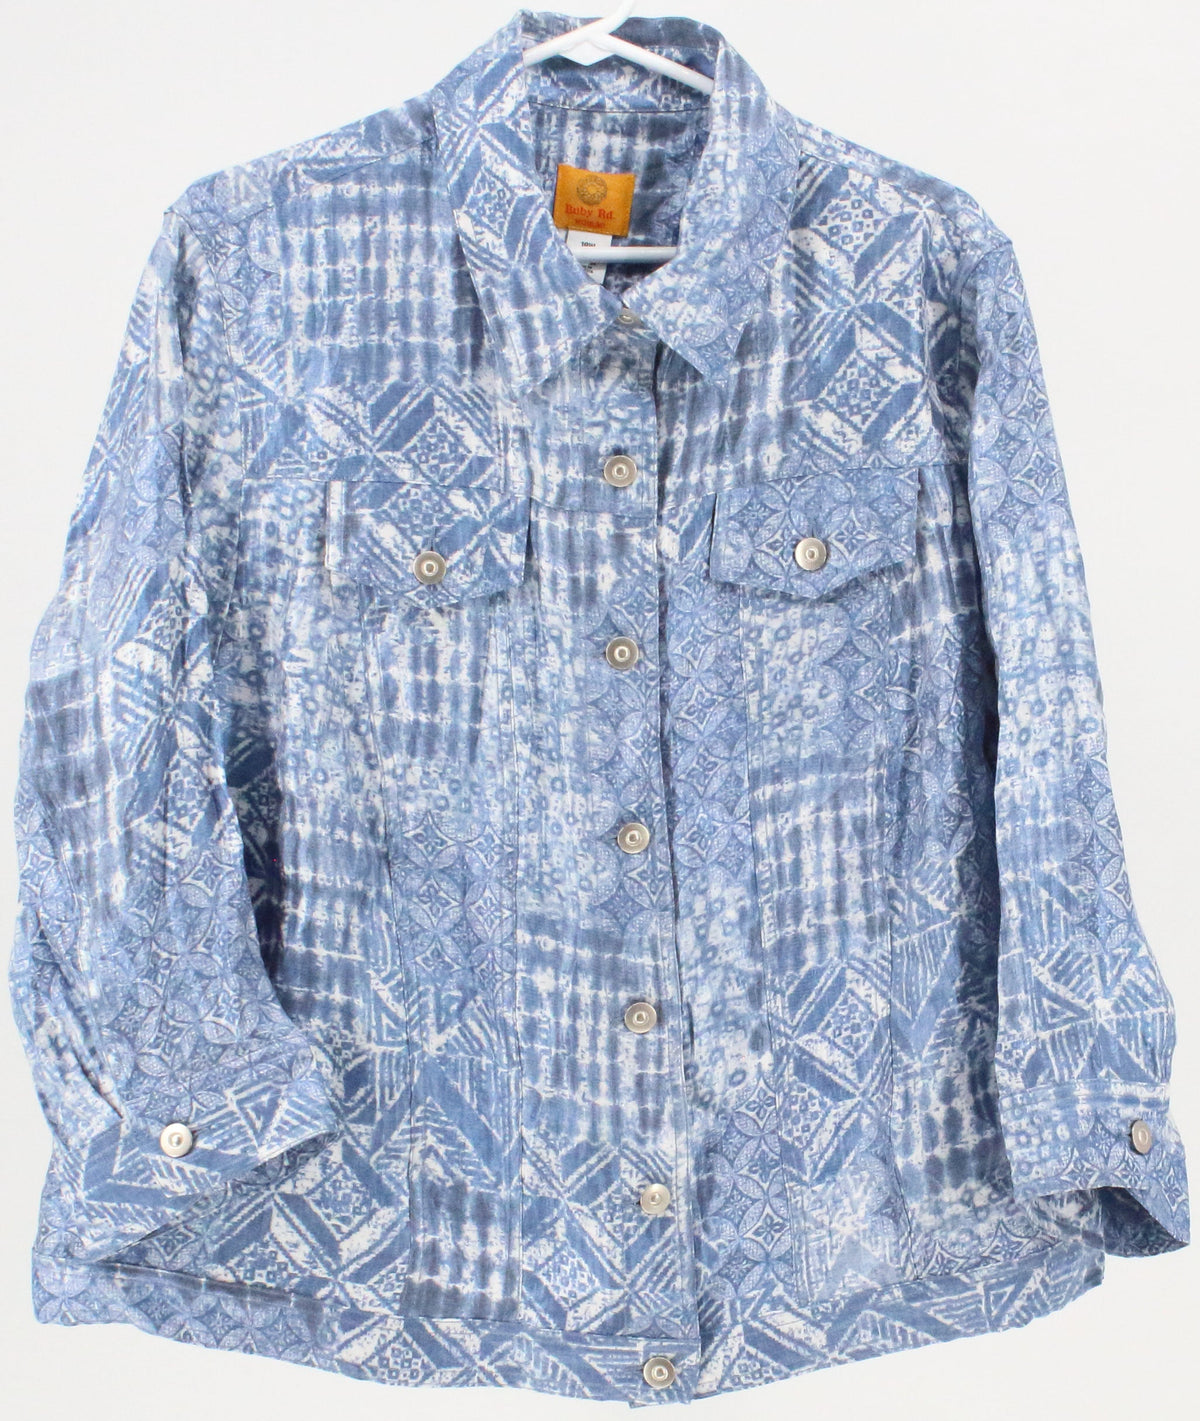 Ruby Rd. Blue and White Print Blouse